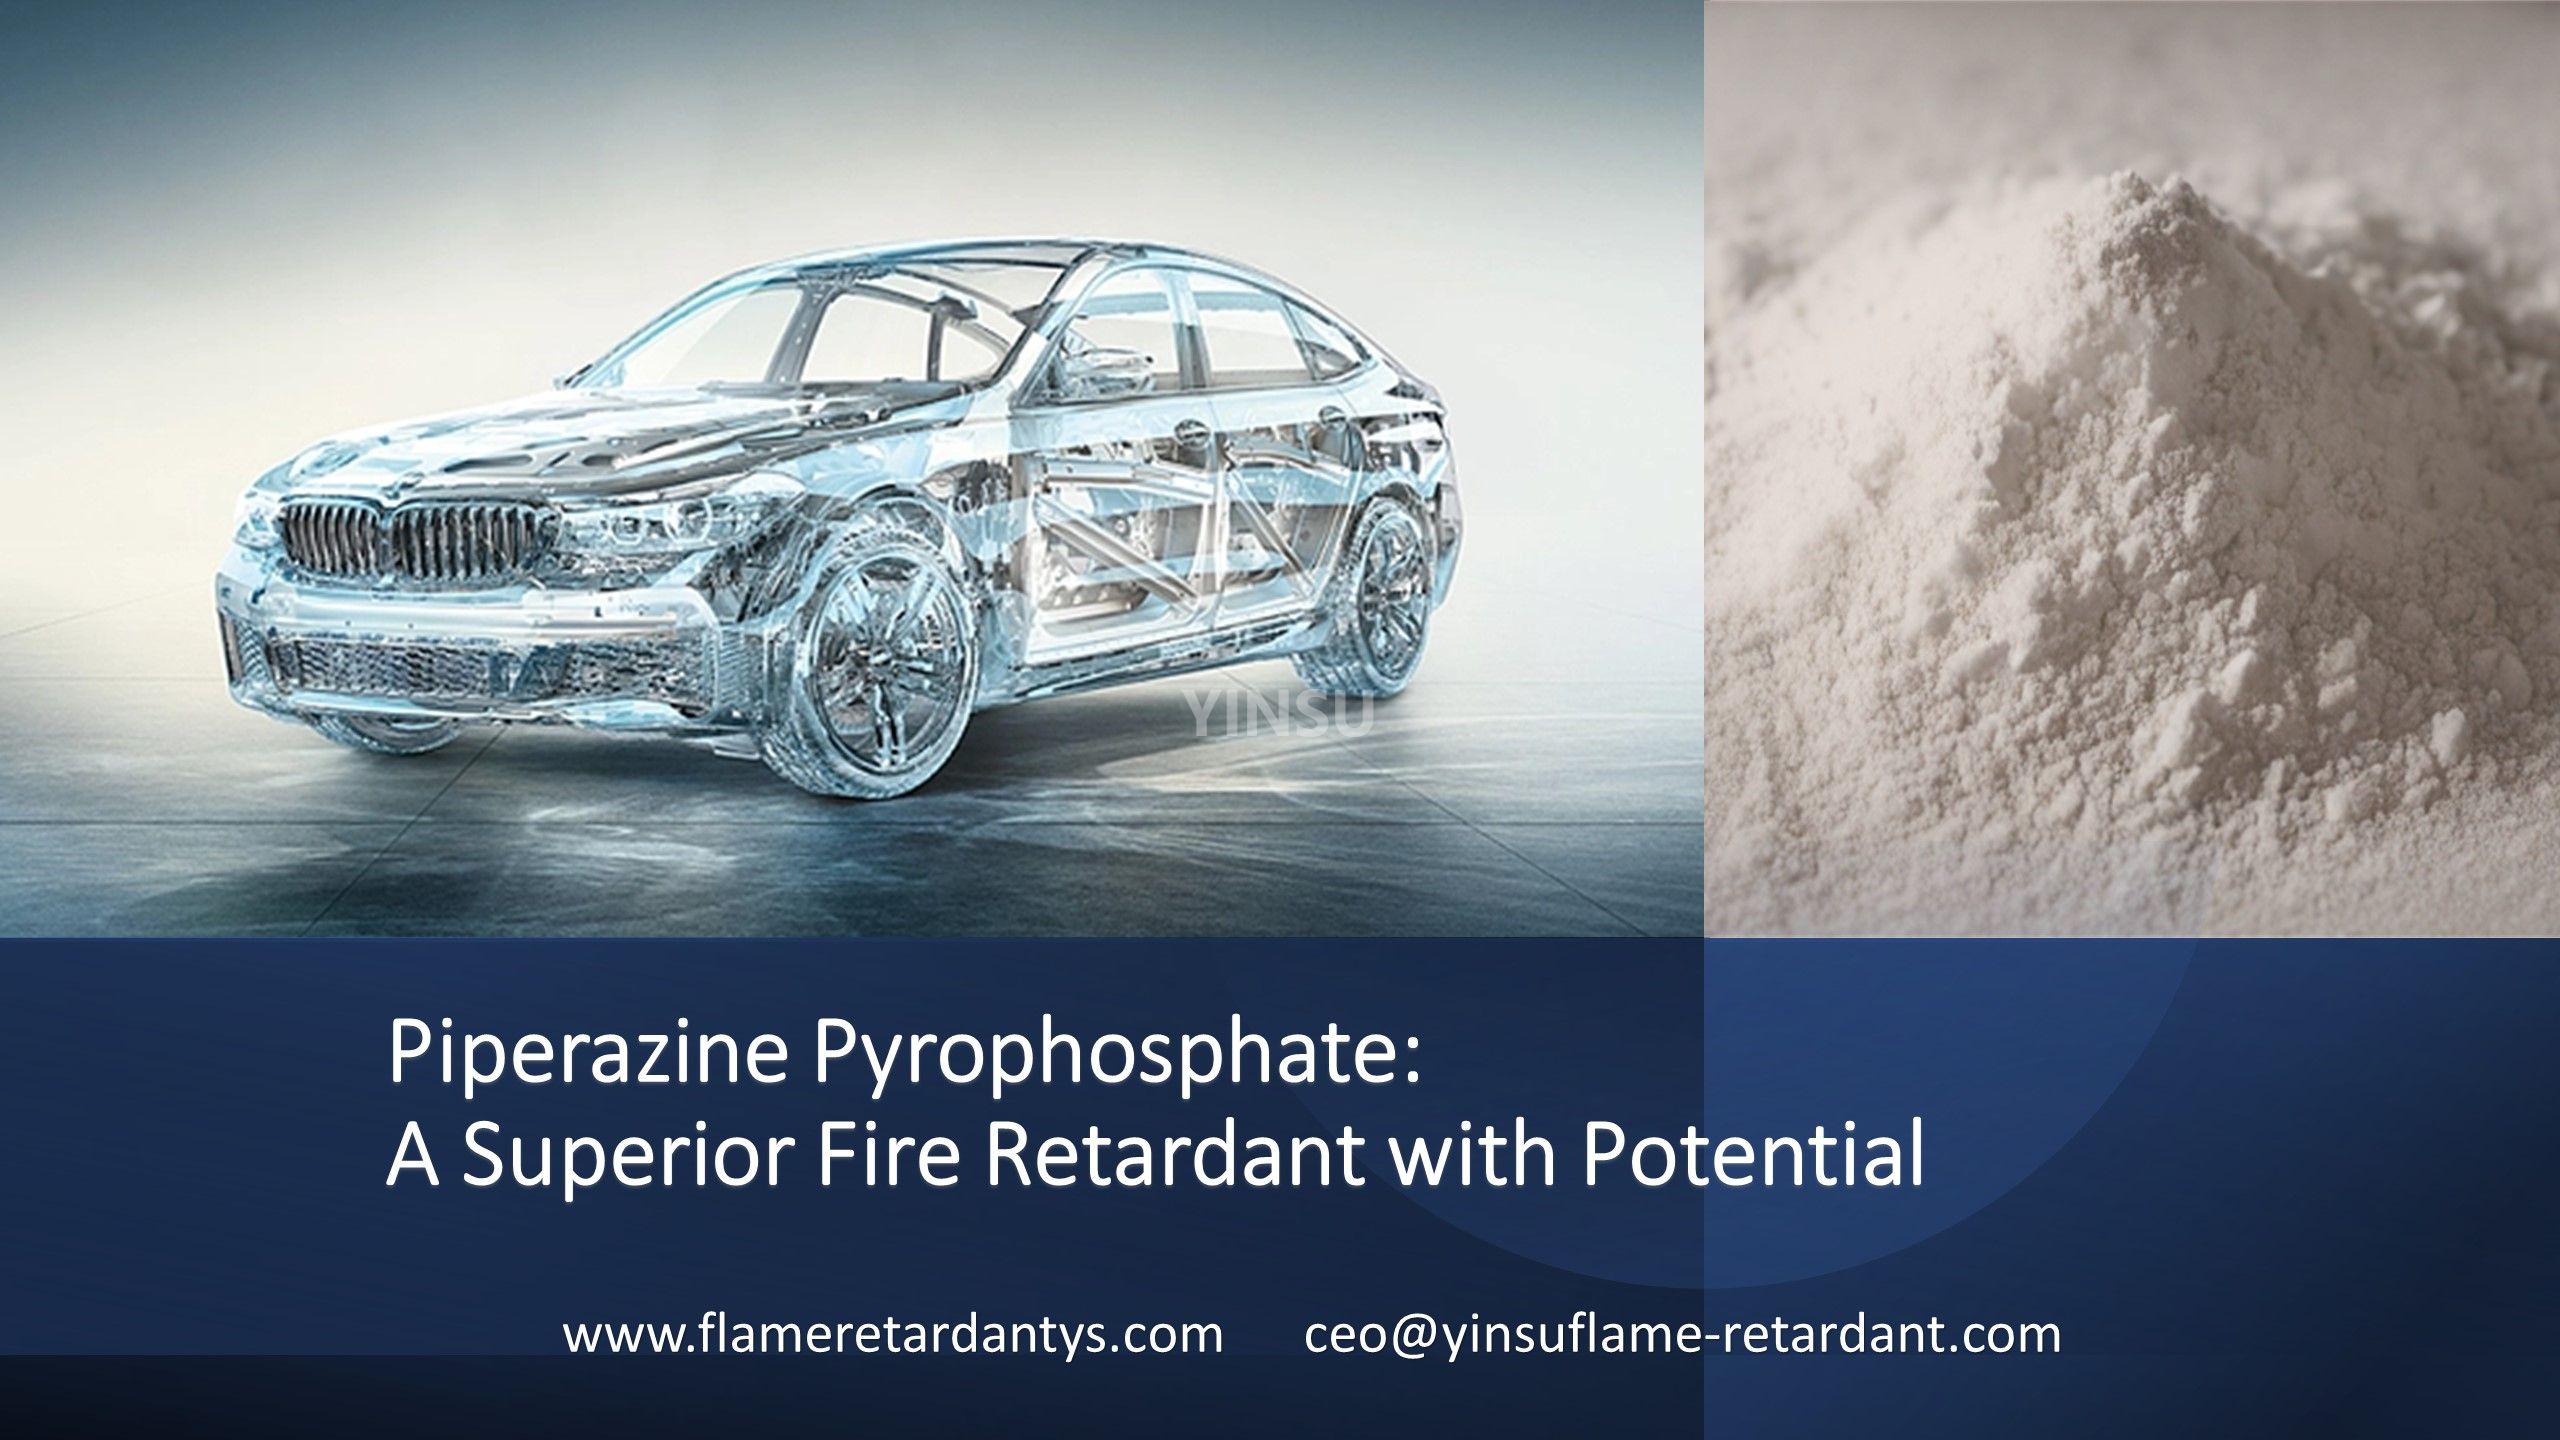 Piperazine Pyrophosphate A Superior Fire Retardant with Potential